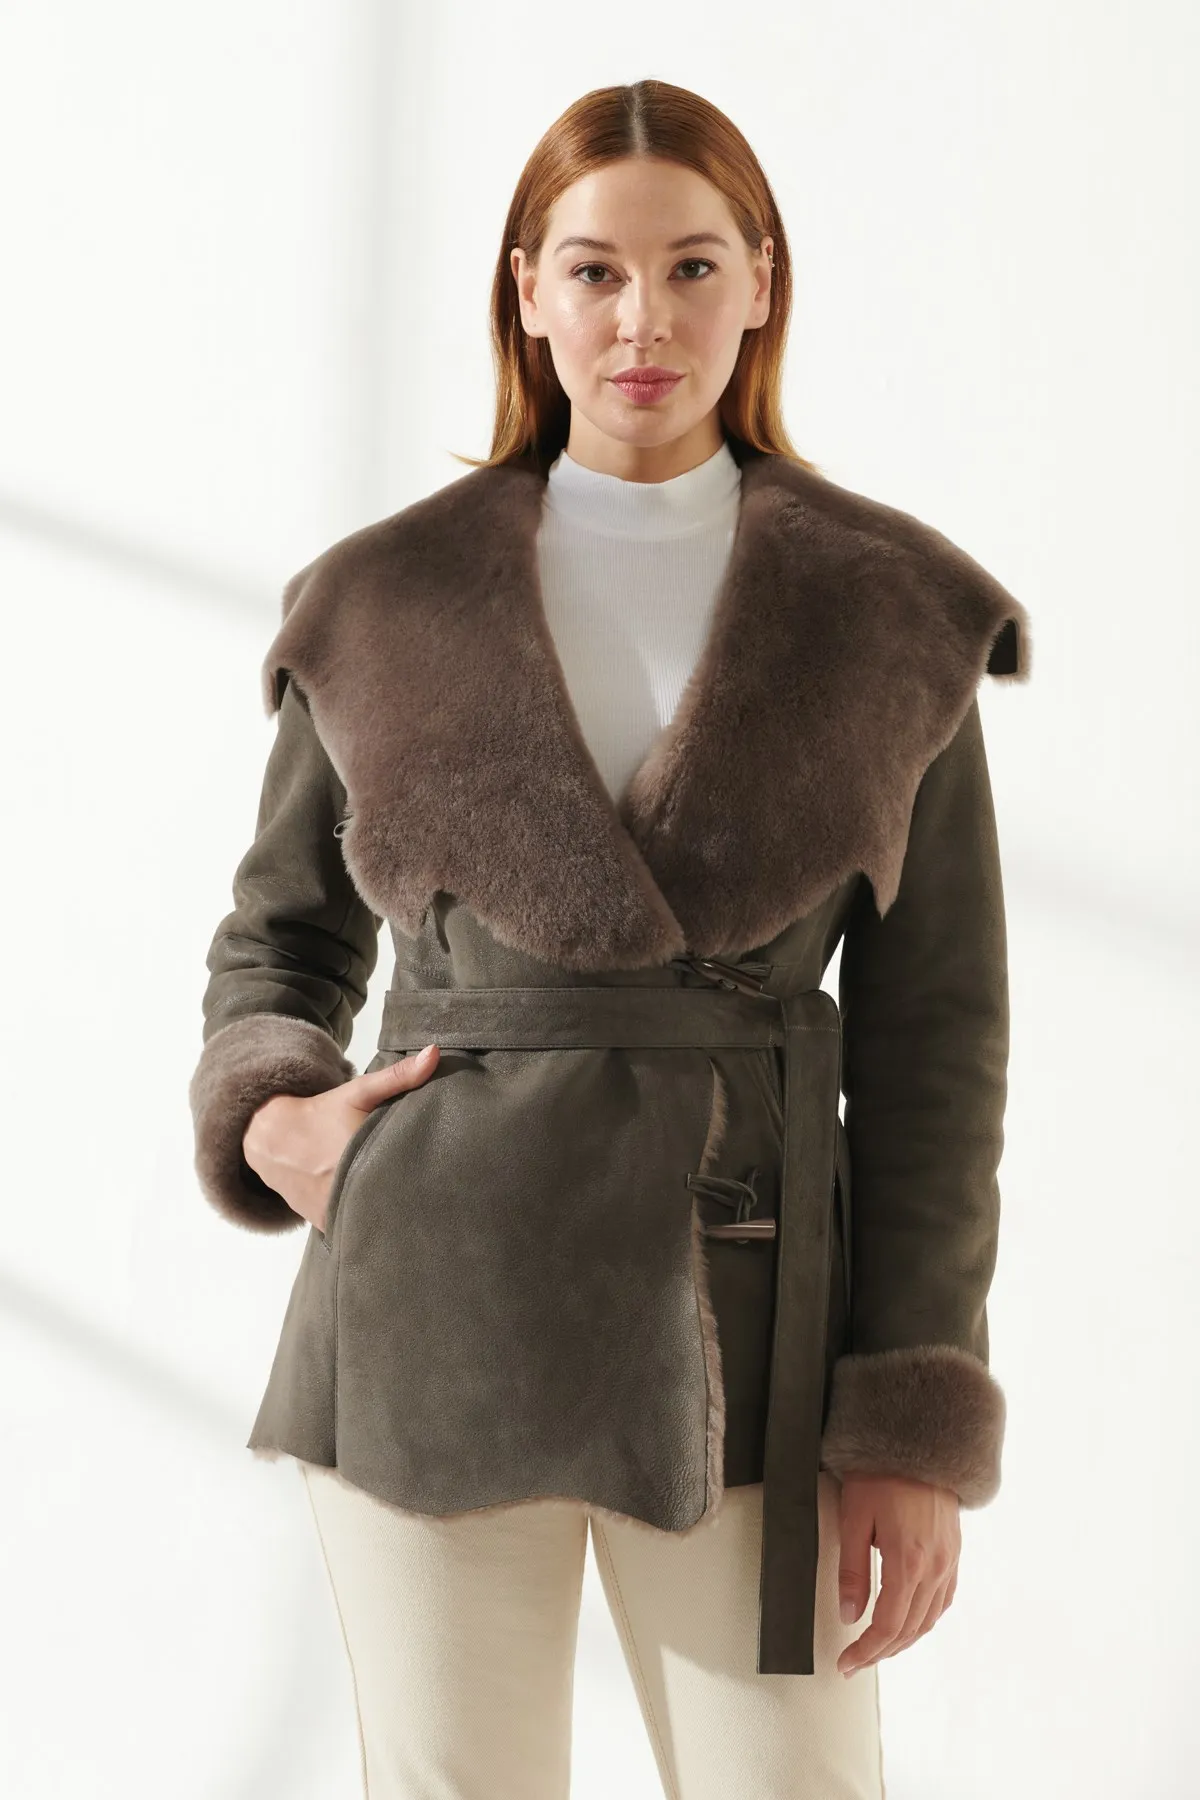 Women's Shearling Jackets Genuine Sheepskin And Fur Winter Warm Coats New Season Design Clothing Products Classic Gray Color